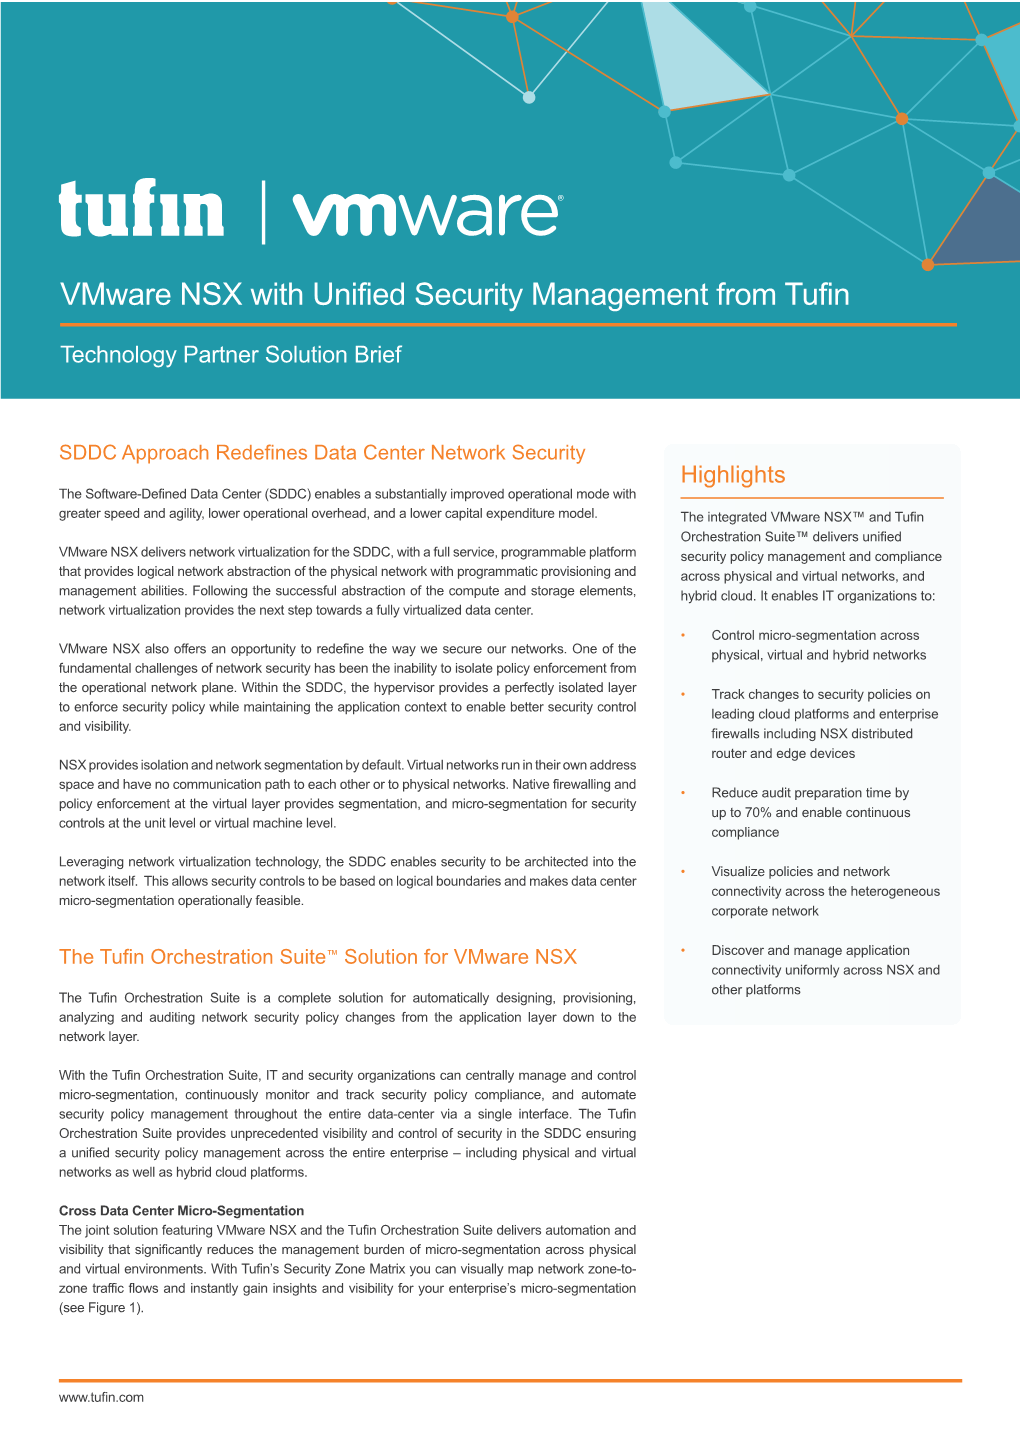 Vmware NSX with Unified Security Management from Tufin